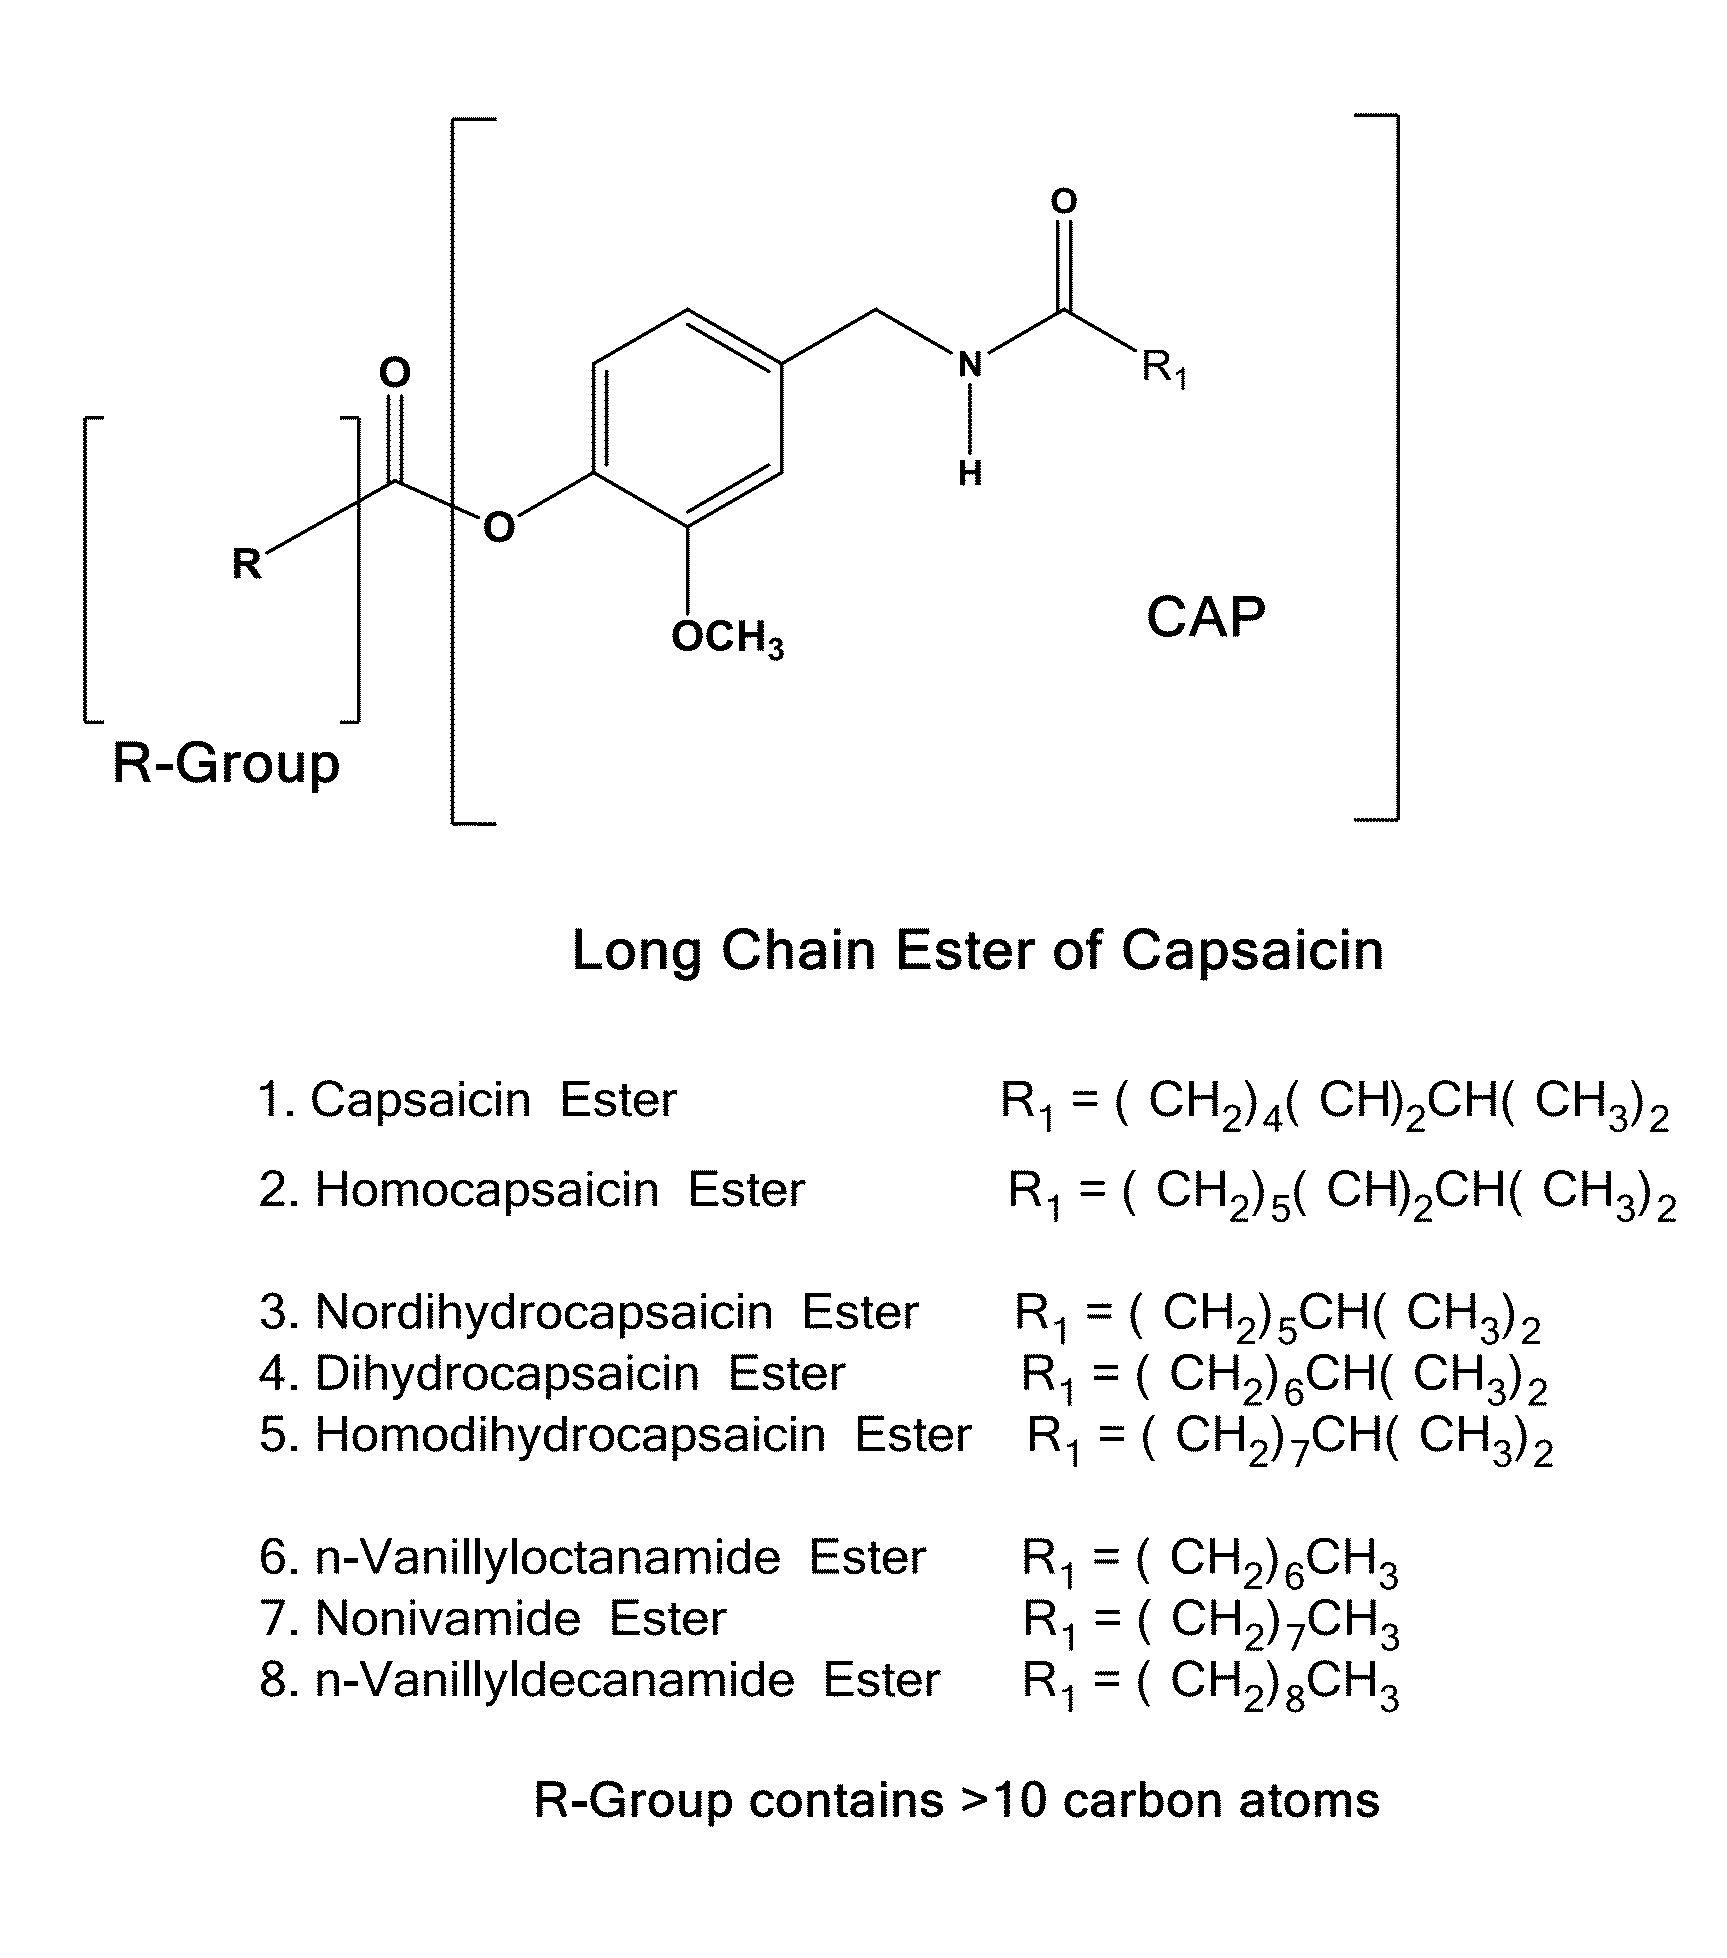 Pharmaceutical Compositions Comprising Capsaicin Esters for Treating Pain and Cold Sores